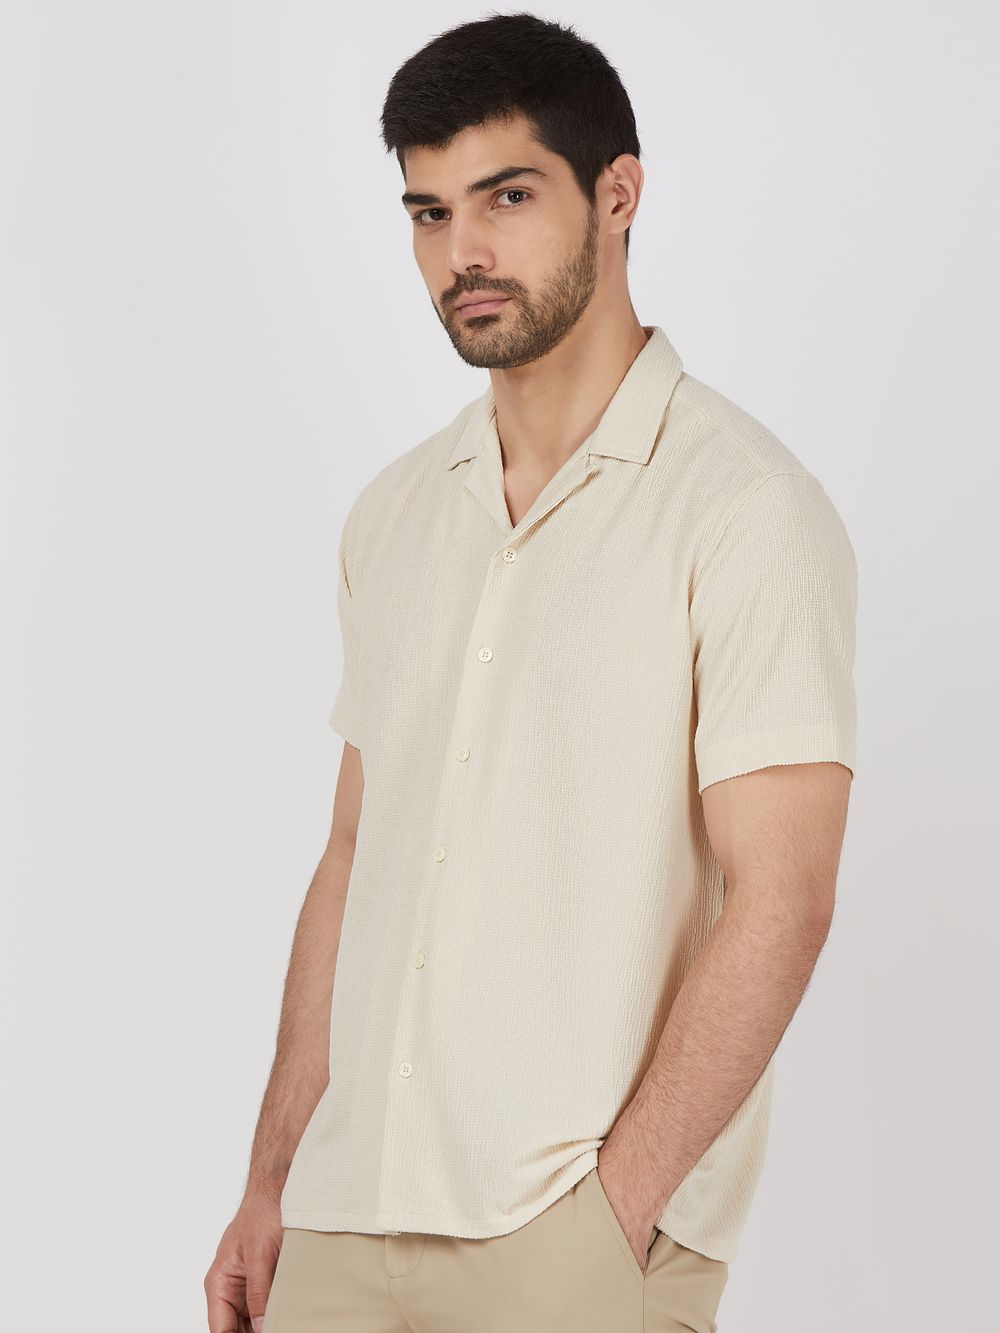 Beige Textured Plain Relaxed Fit Casual Shirt